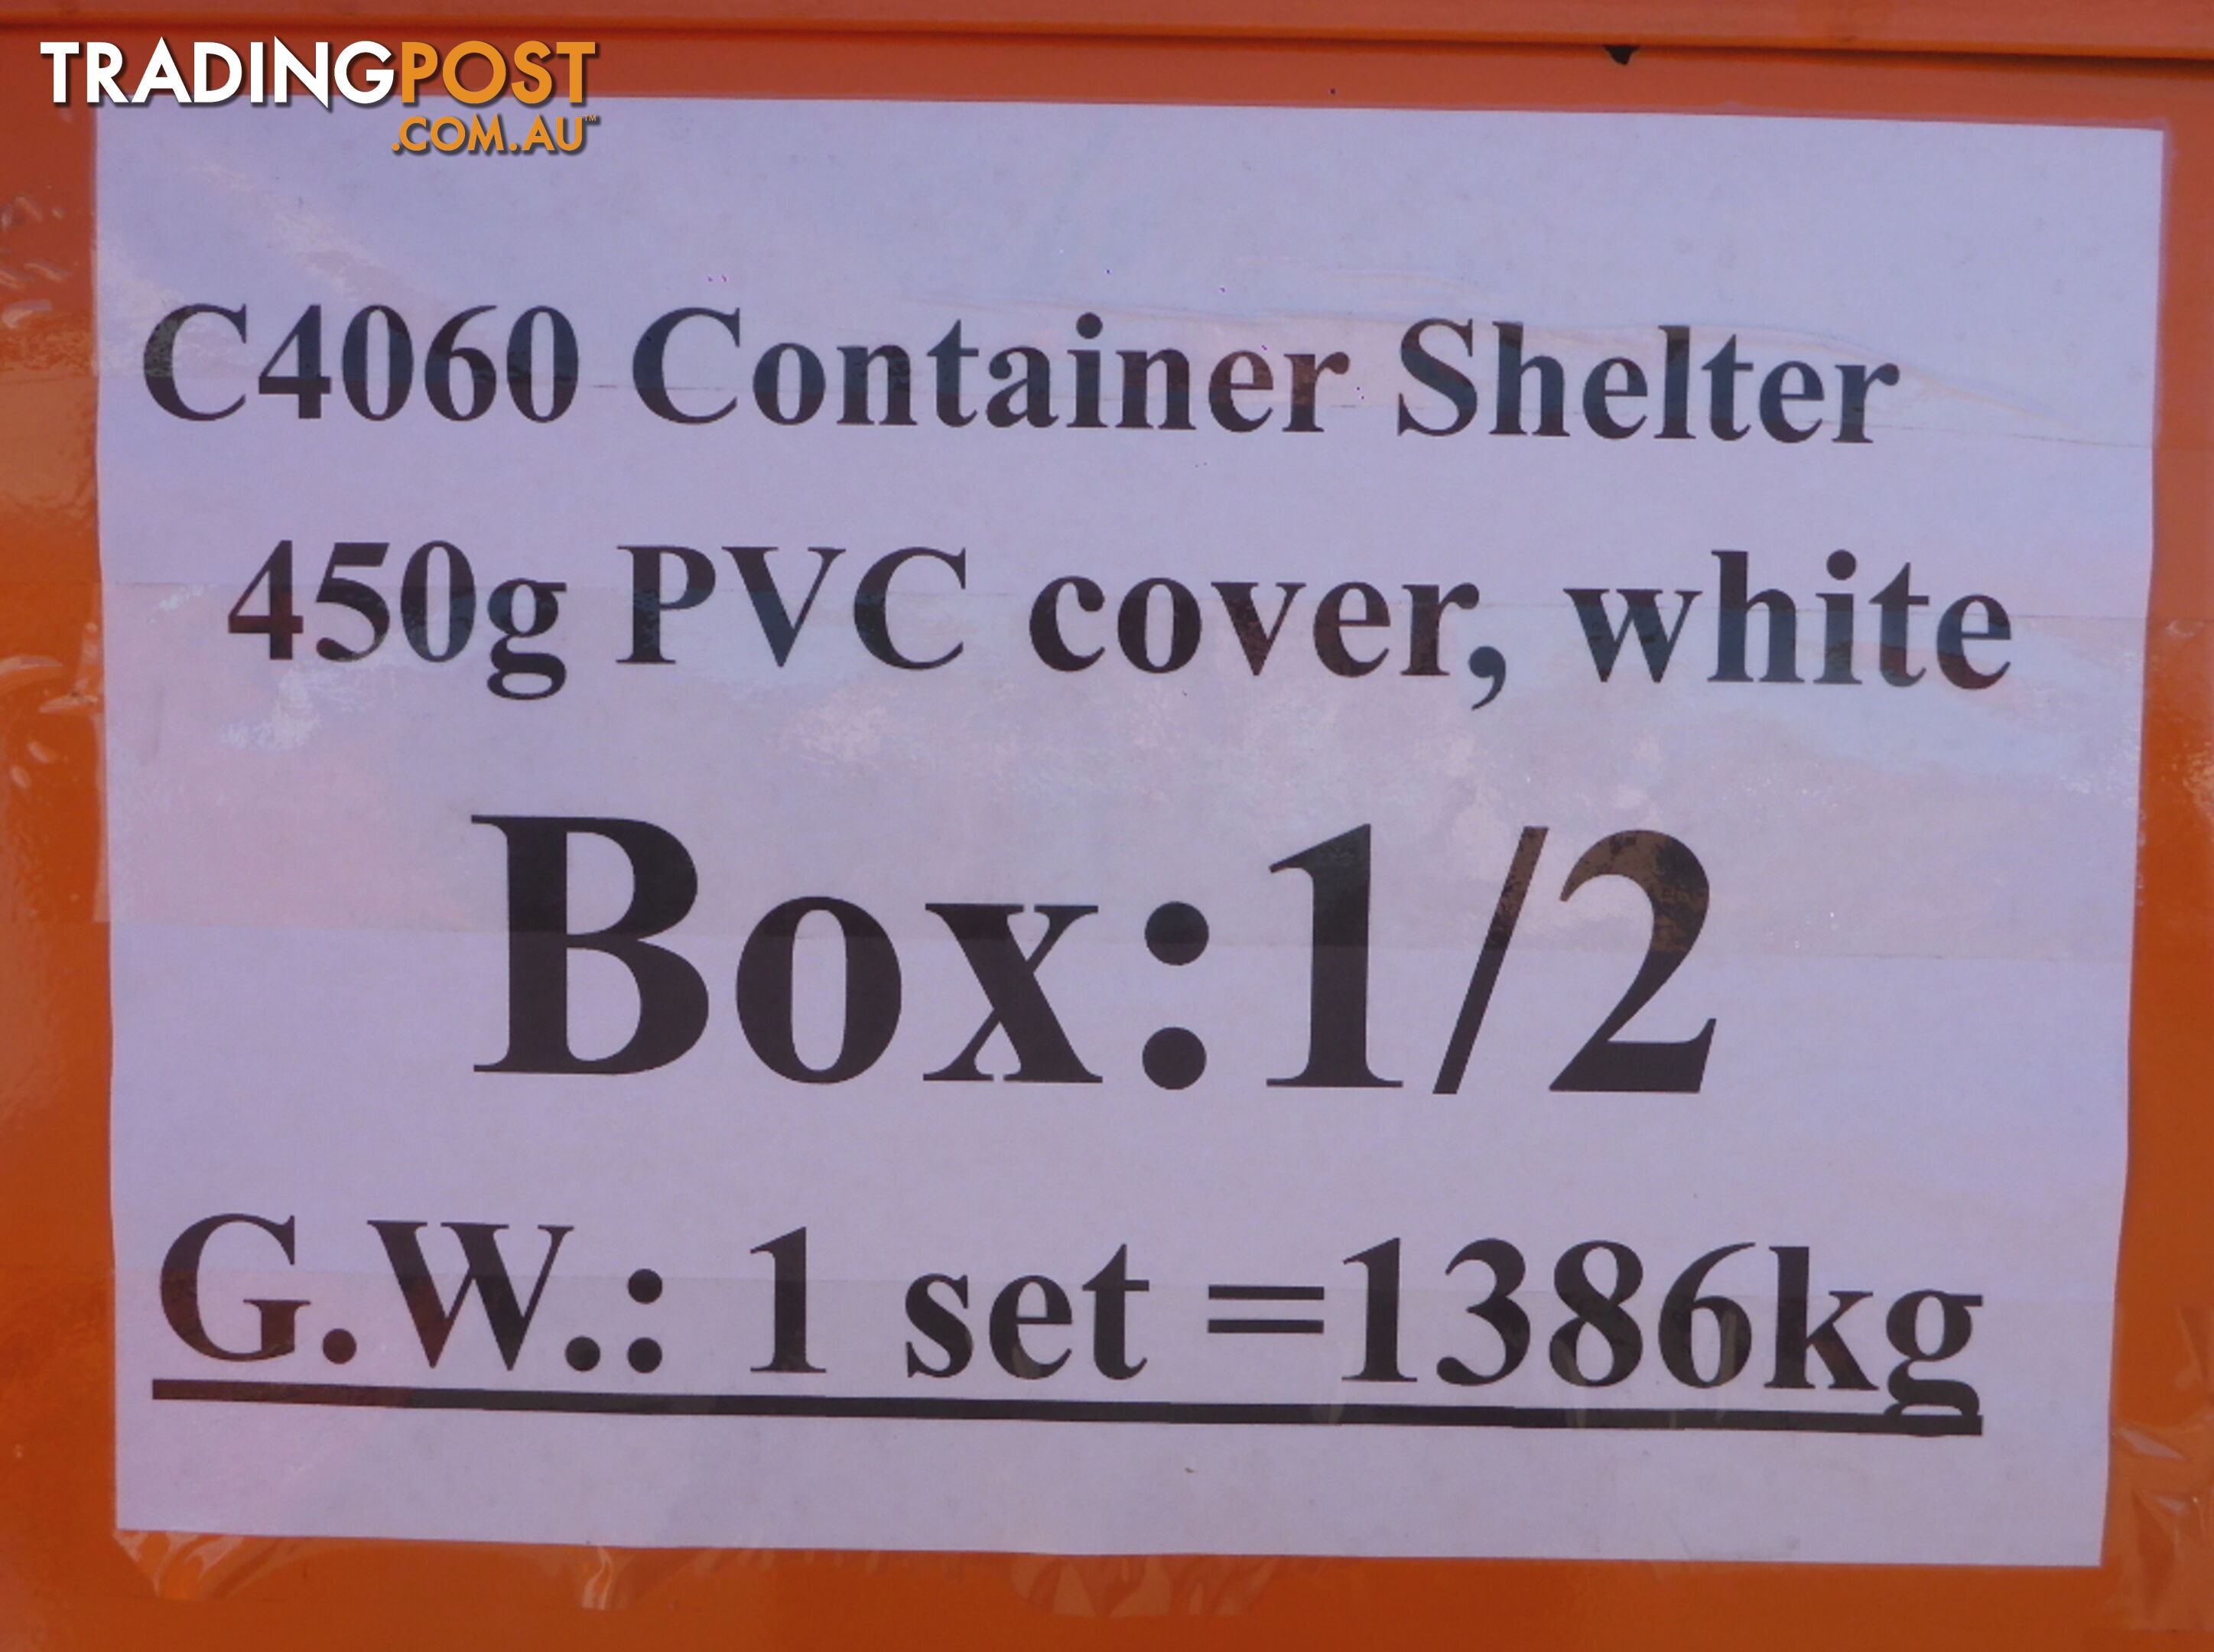 New 12m x 18m (223m2) Container Shelter Workshop Igloo Dome